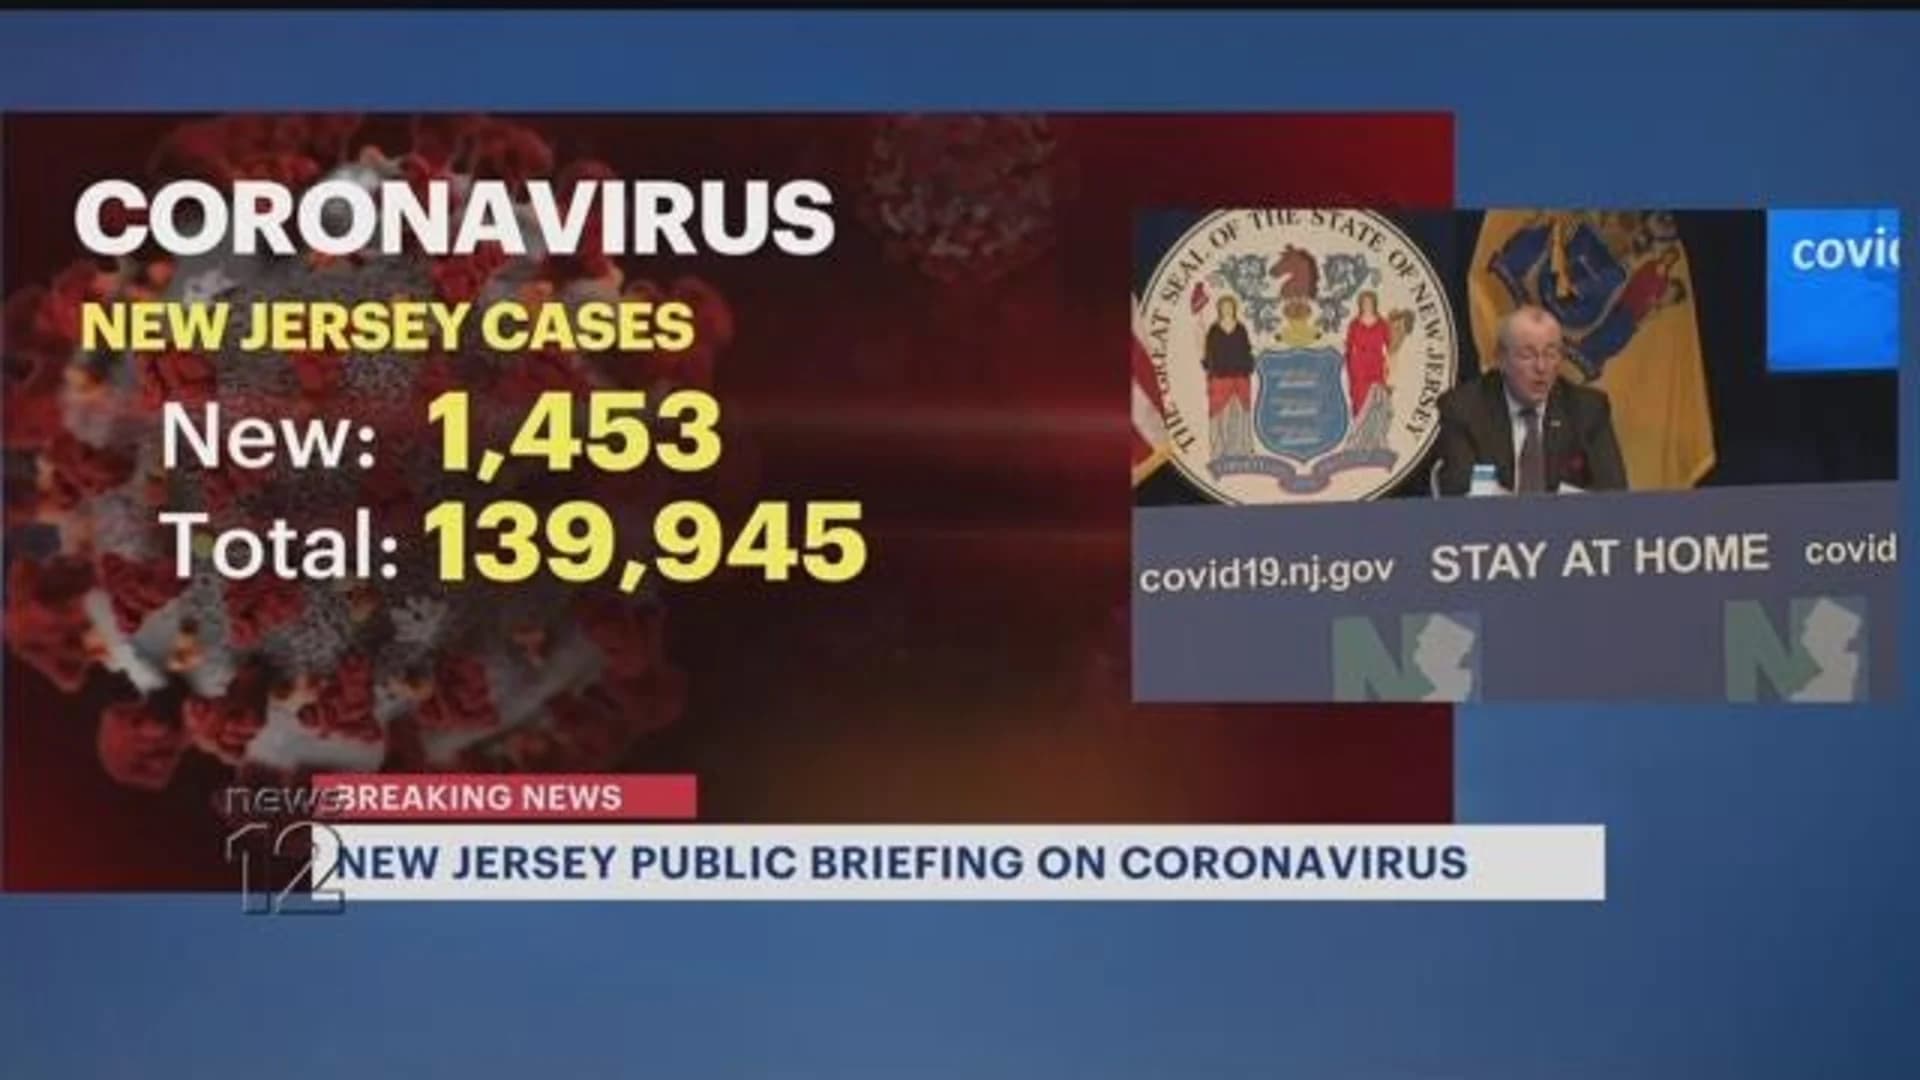 Gov. Murphy: Promising virus data trends mean reopen dates could come soon